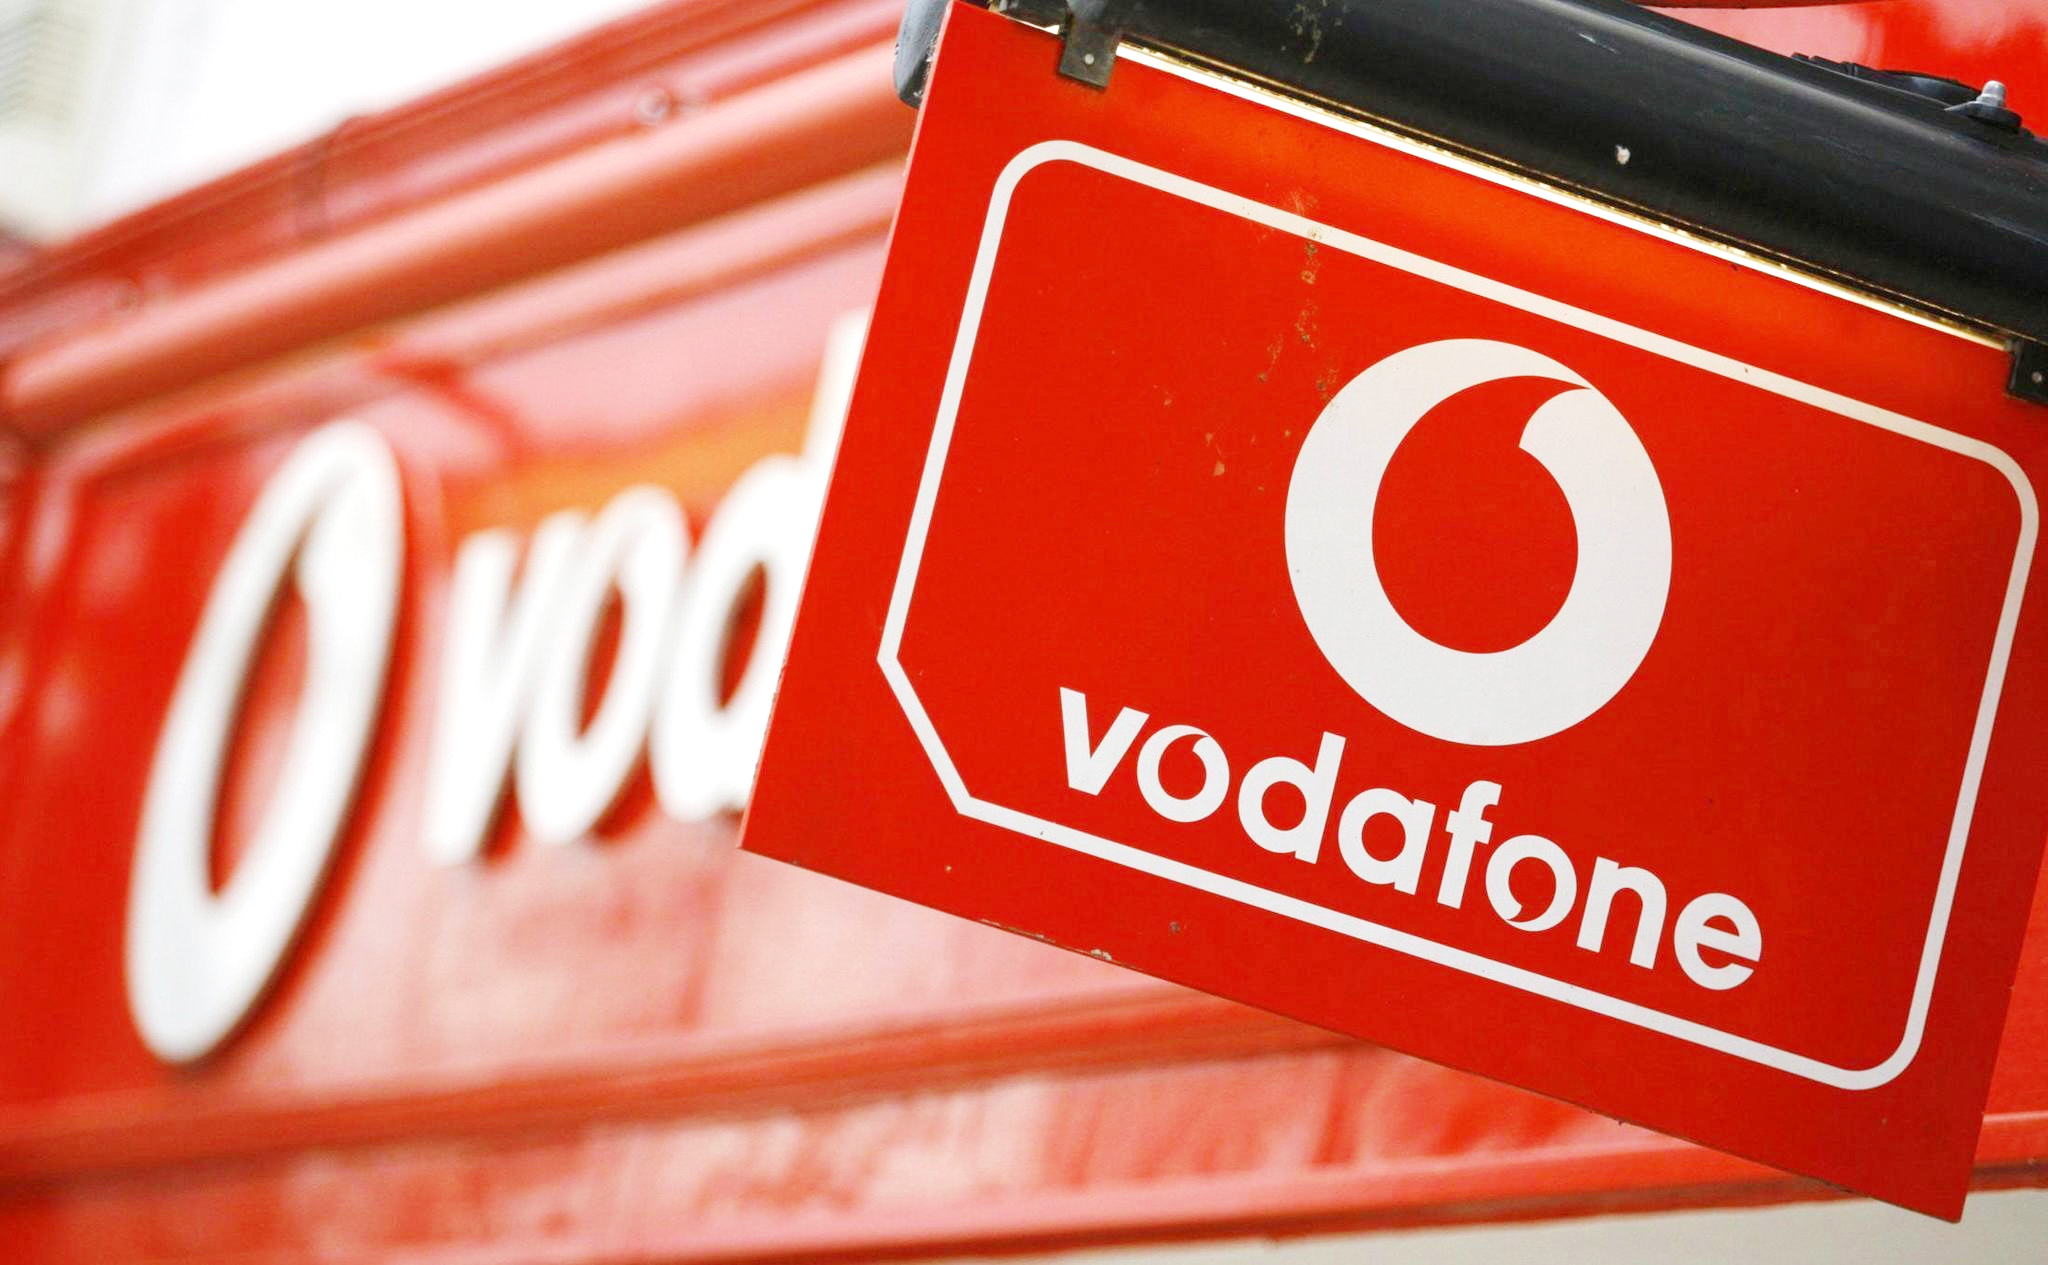 A Vodafone sign on May 30, 2006. (AP)